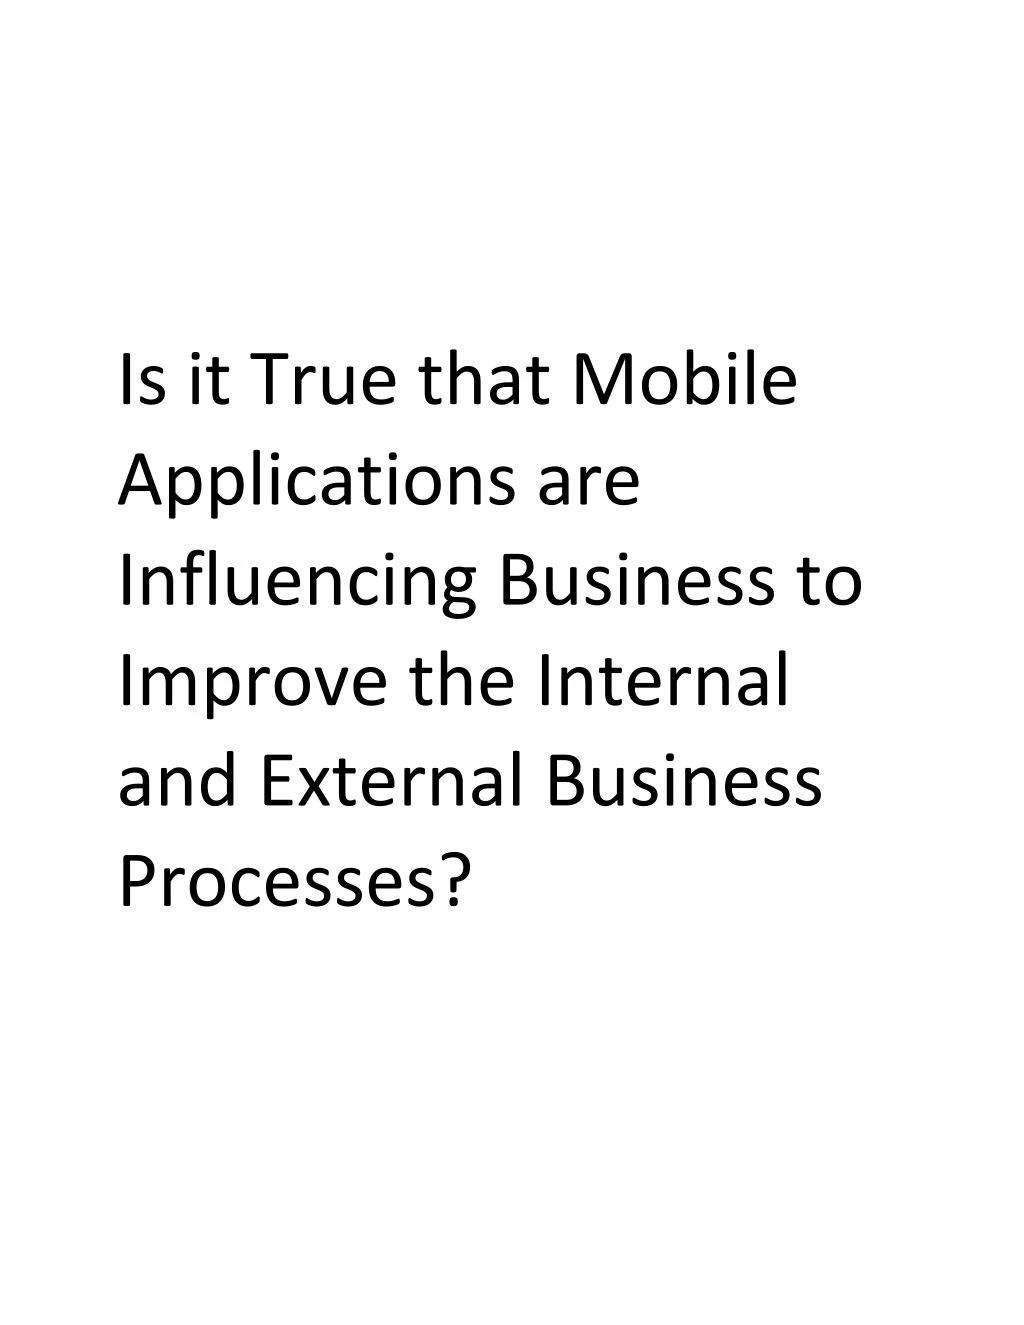 is it true that mobile applications